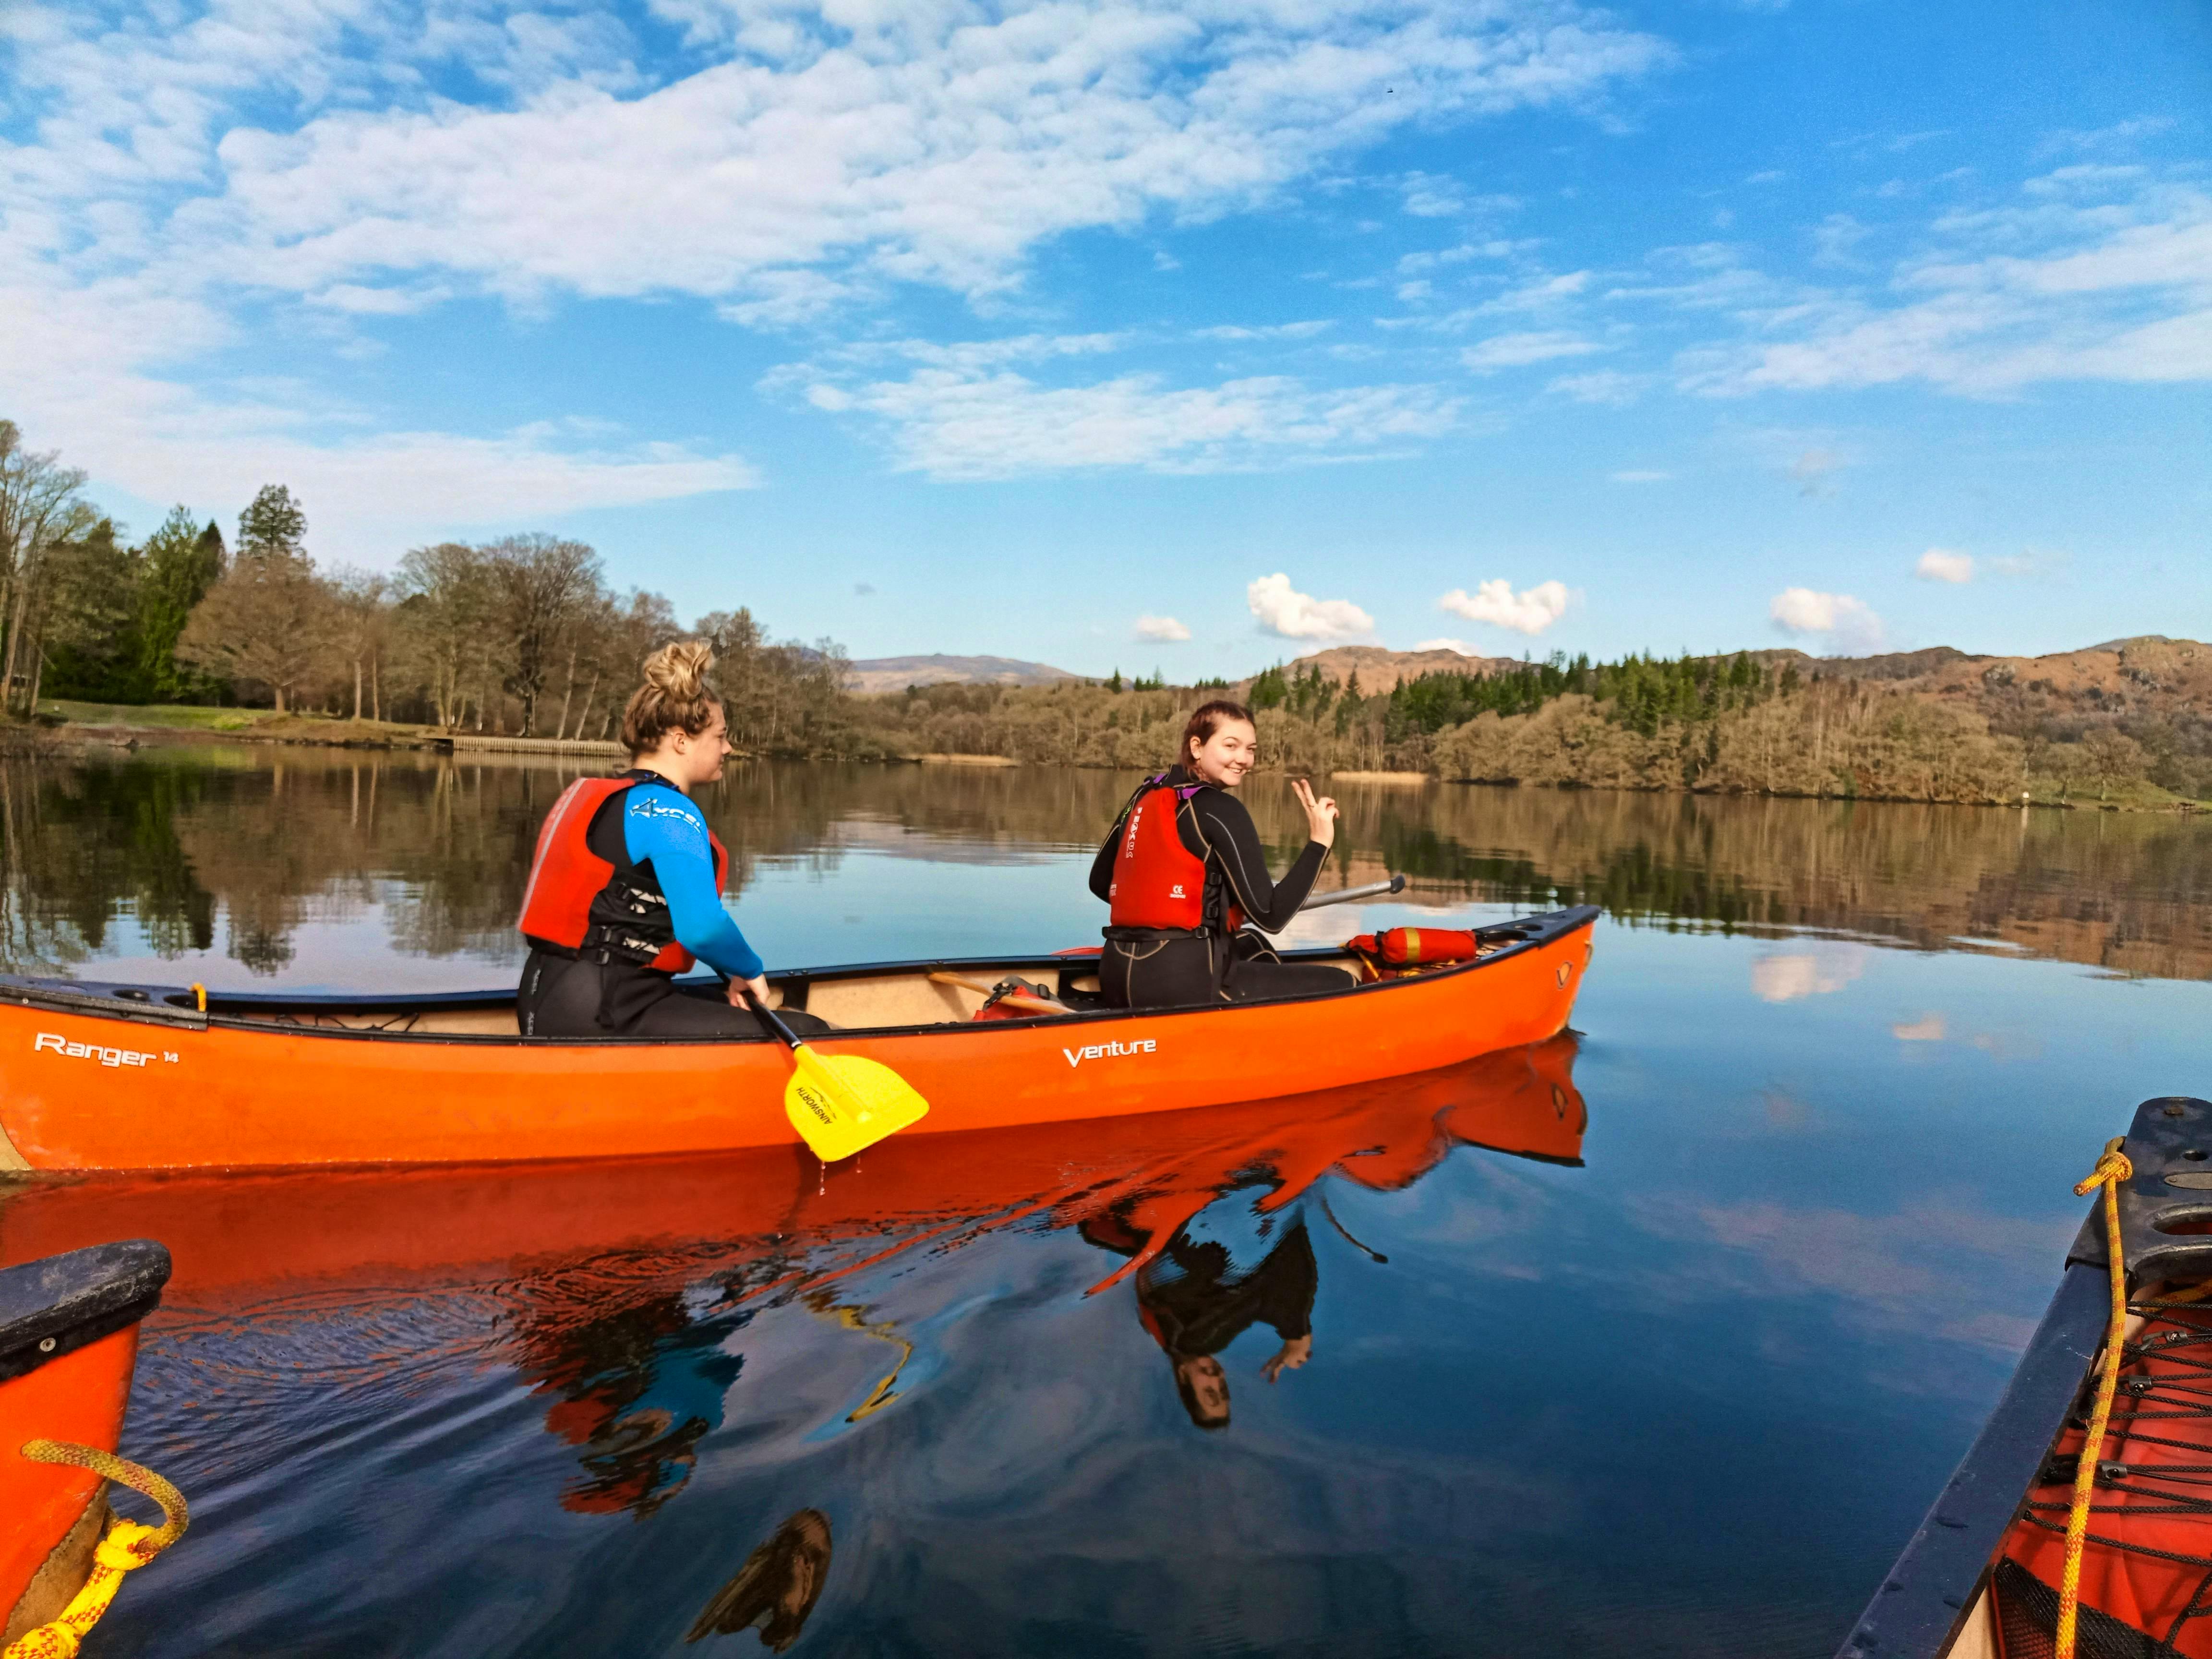 A canoe camping checklist for every paddler - EverybodyAdventures